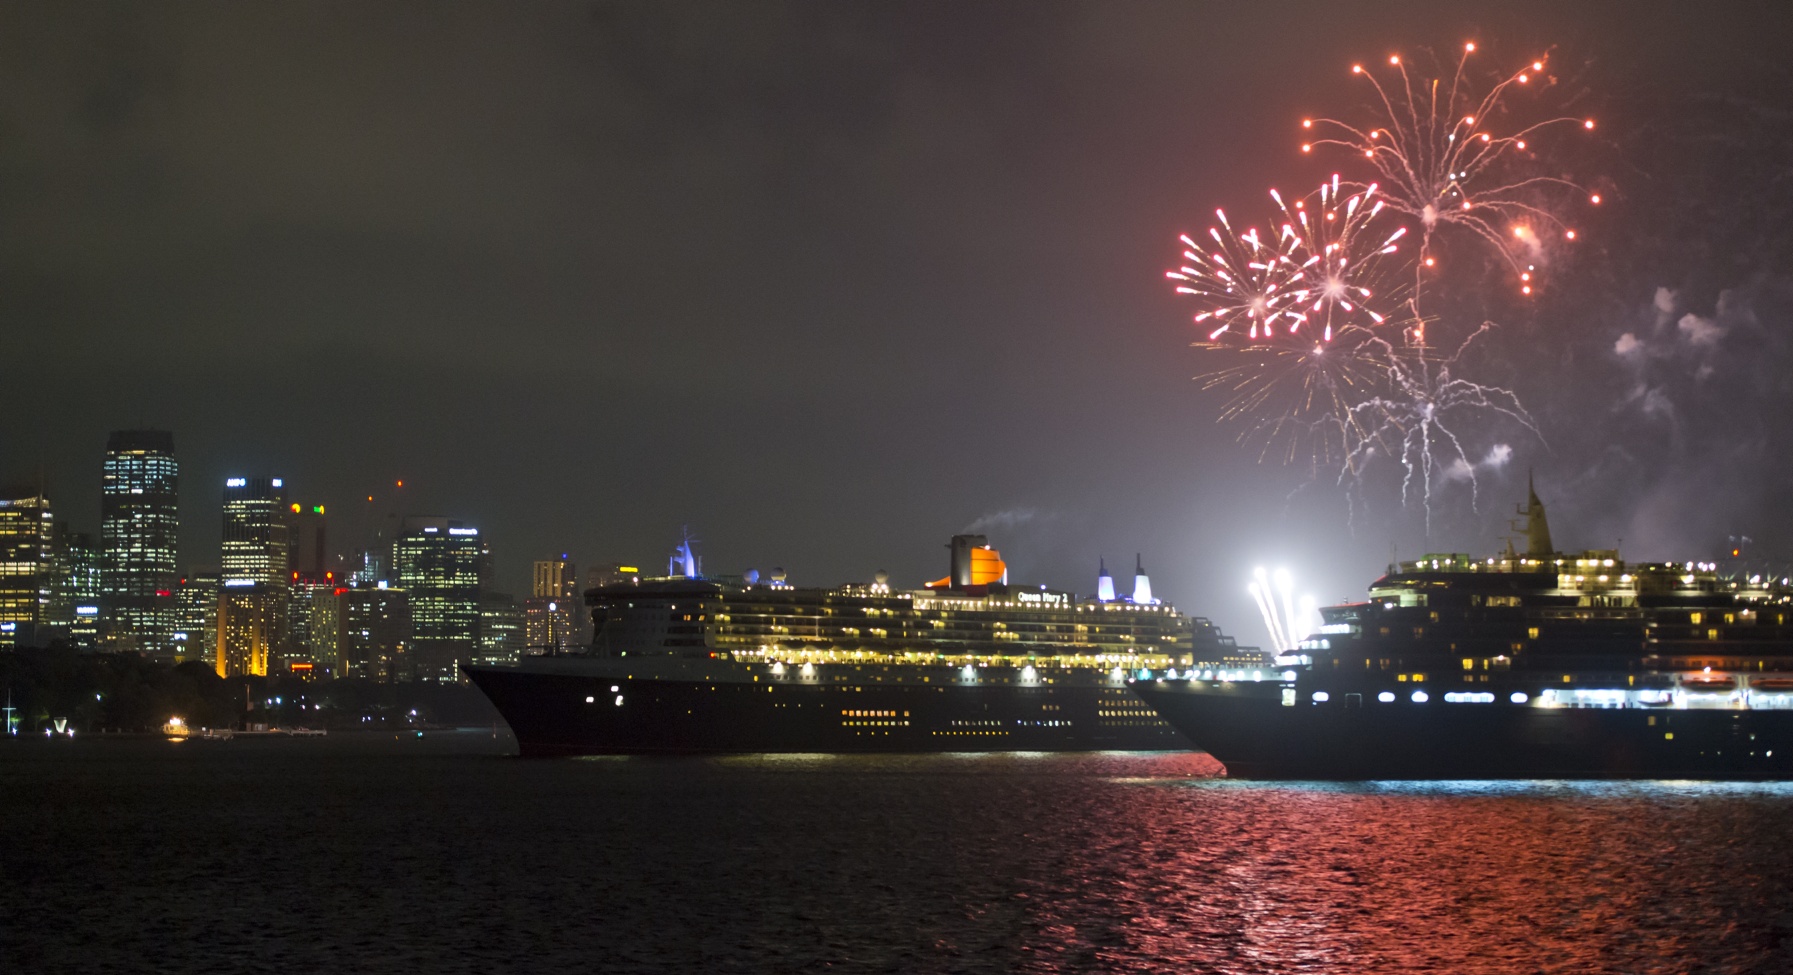 Fireworks light up Sydney as Queen Mary 2 sails by Queen Victoria March 12 2015 Photo by James Morgan 2